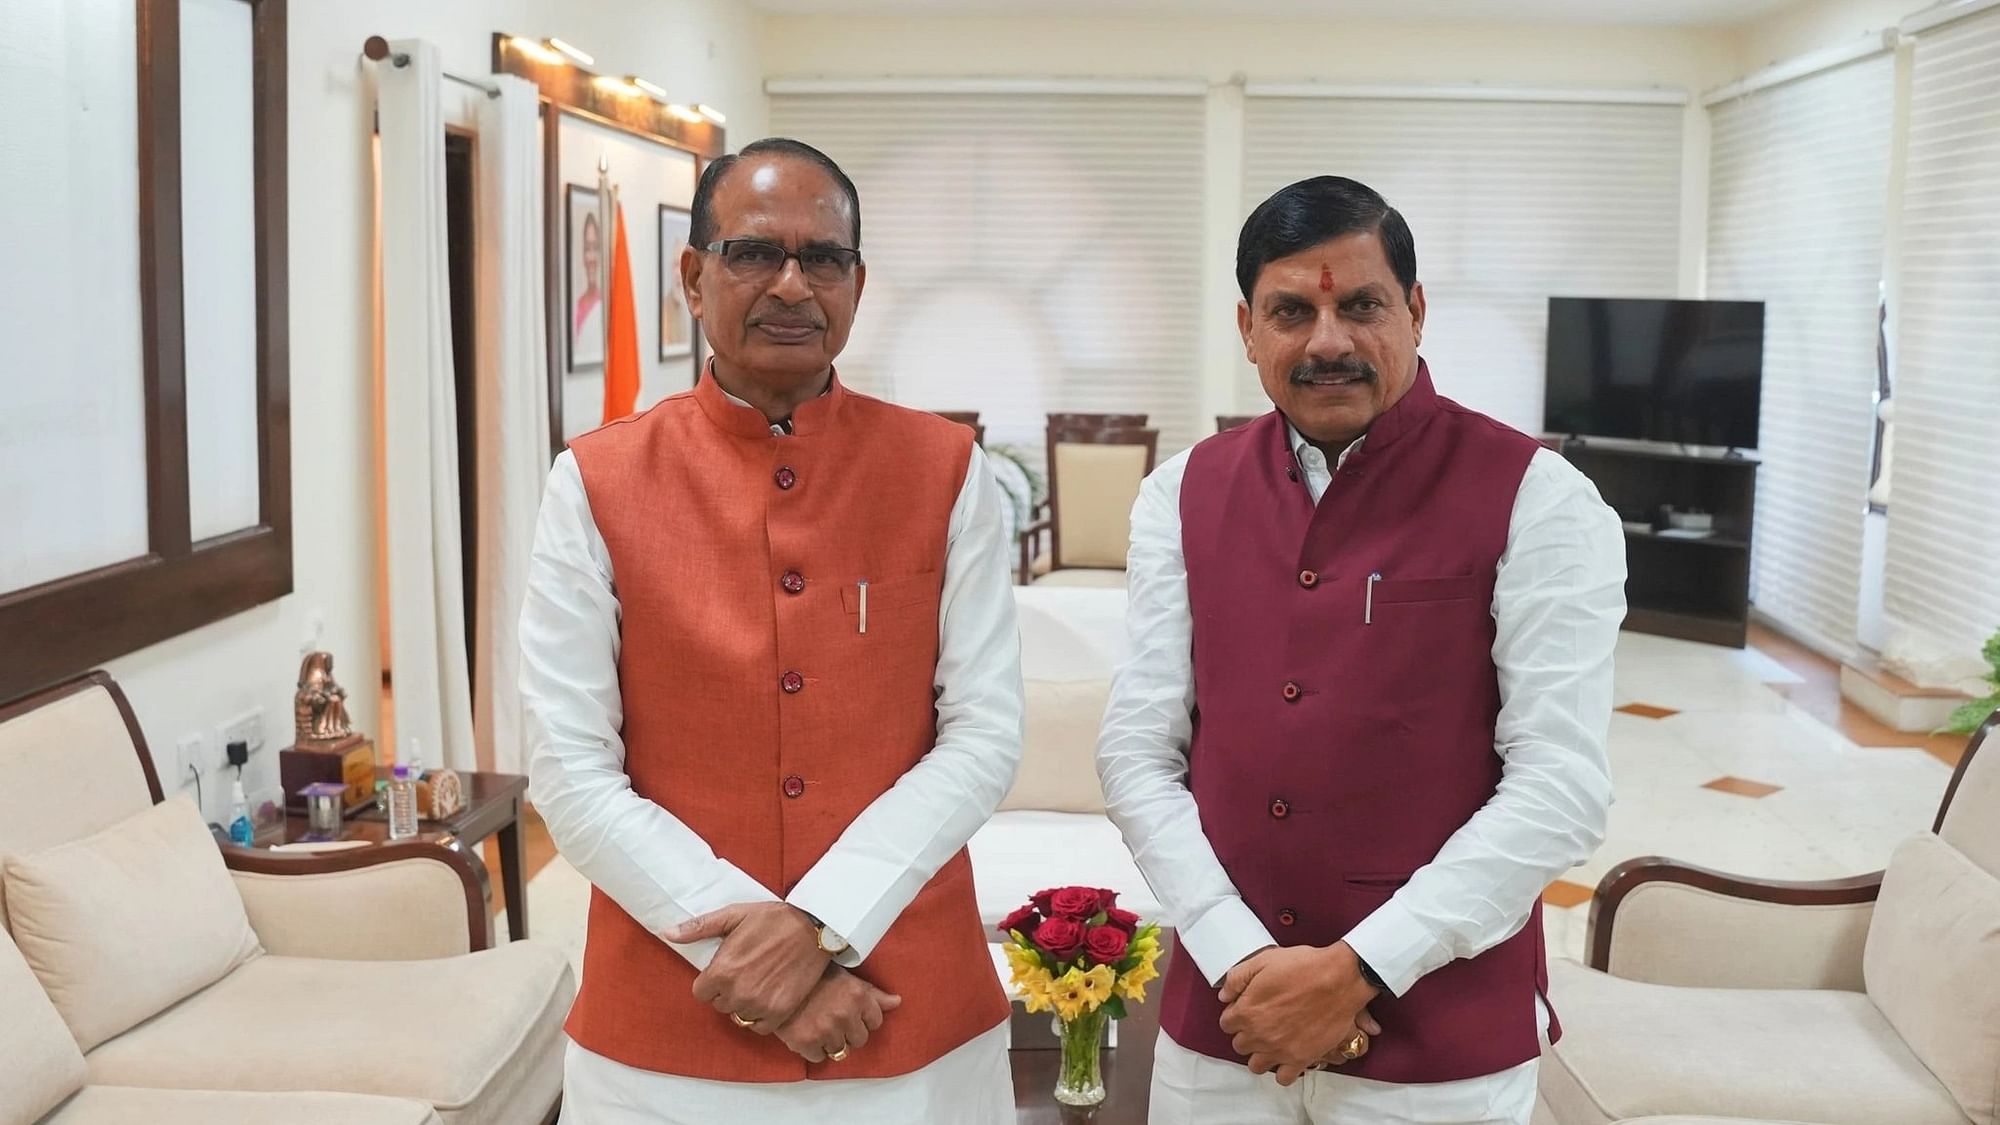 <div class="paragraphs"><p>Although Shivraj Singh Chouhan was hinted about the end of his chief ministerial tenure before the polls, experts say there's still a lot of politics left in him.&nbsp;</p></div>